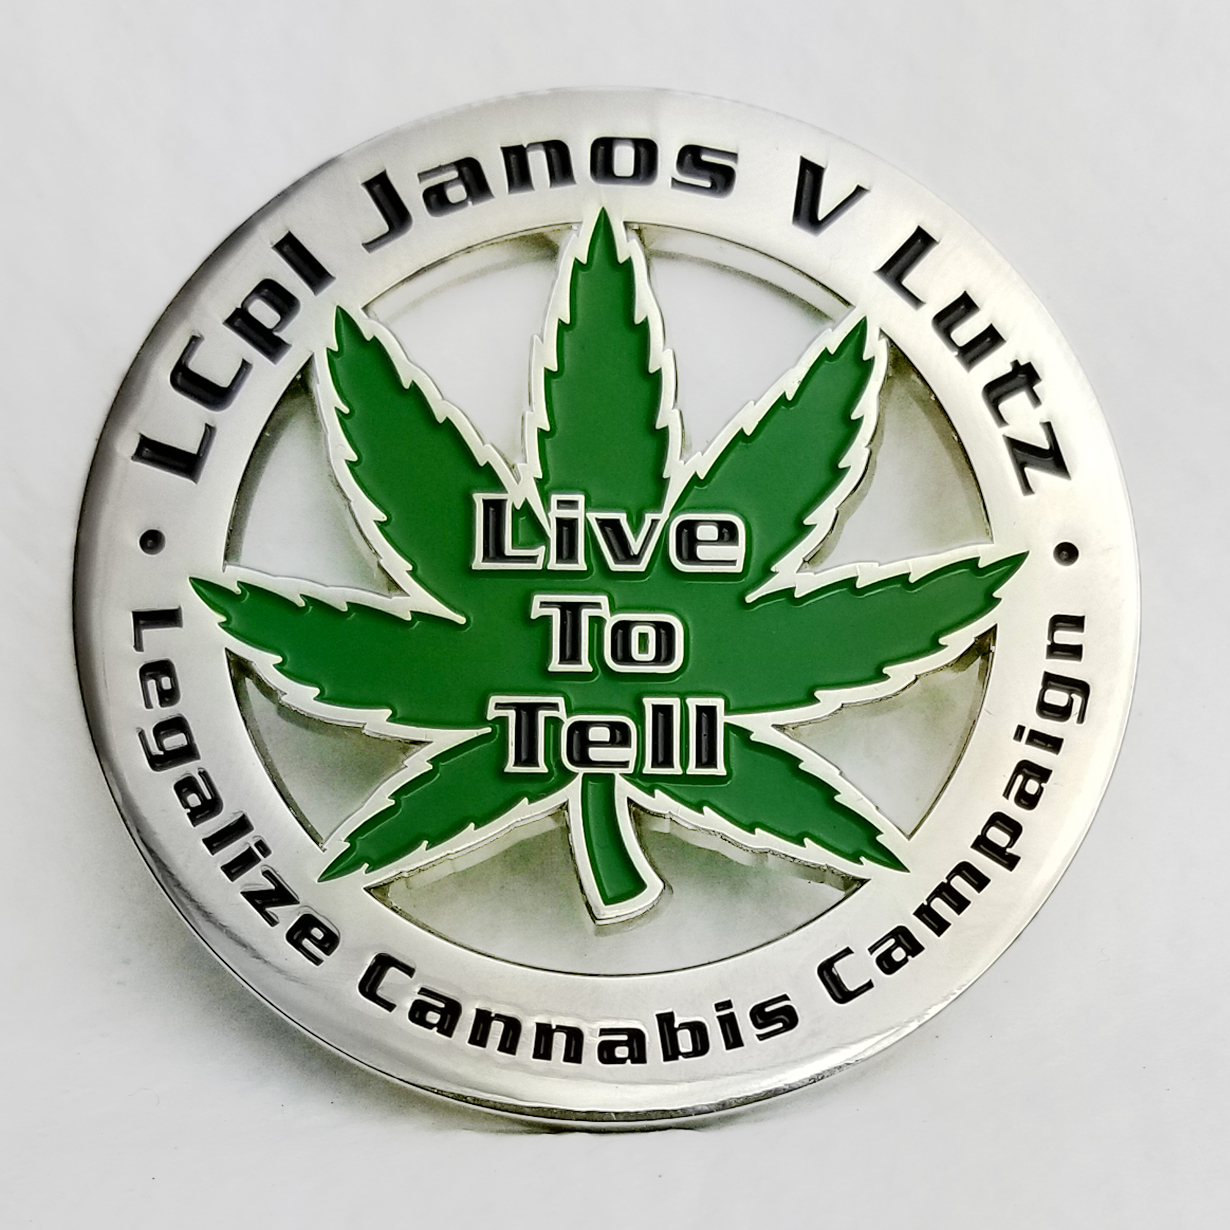 Reclassify Cannabis Challenge Coin